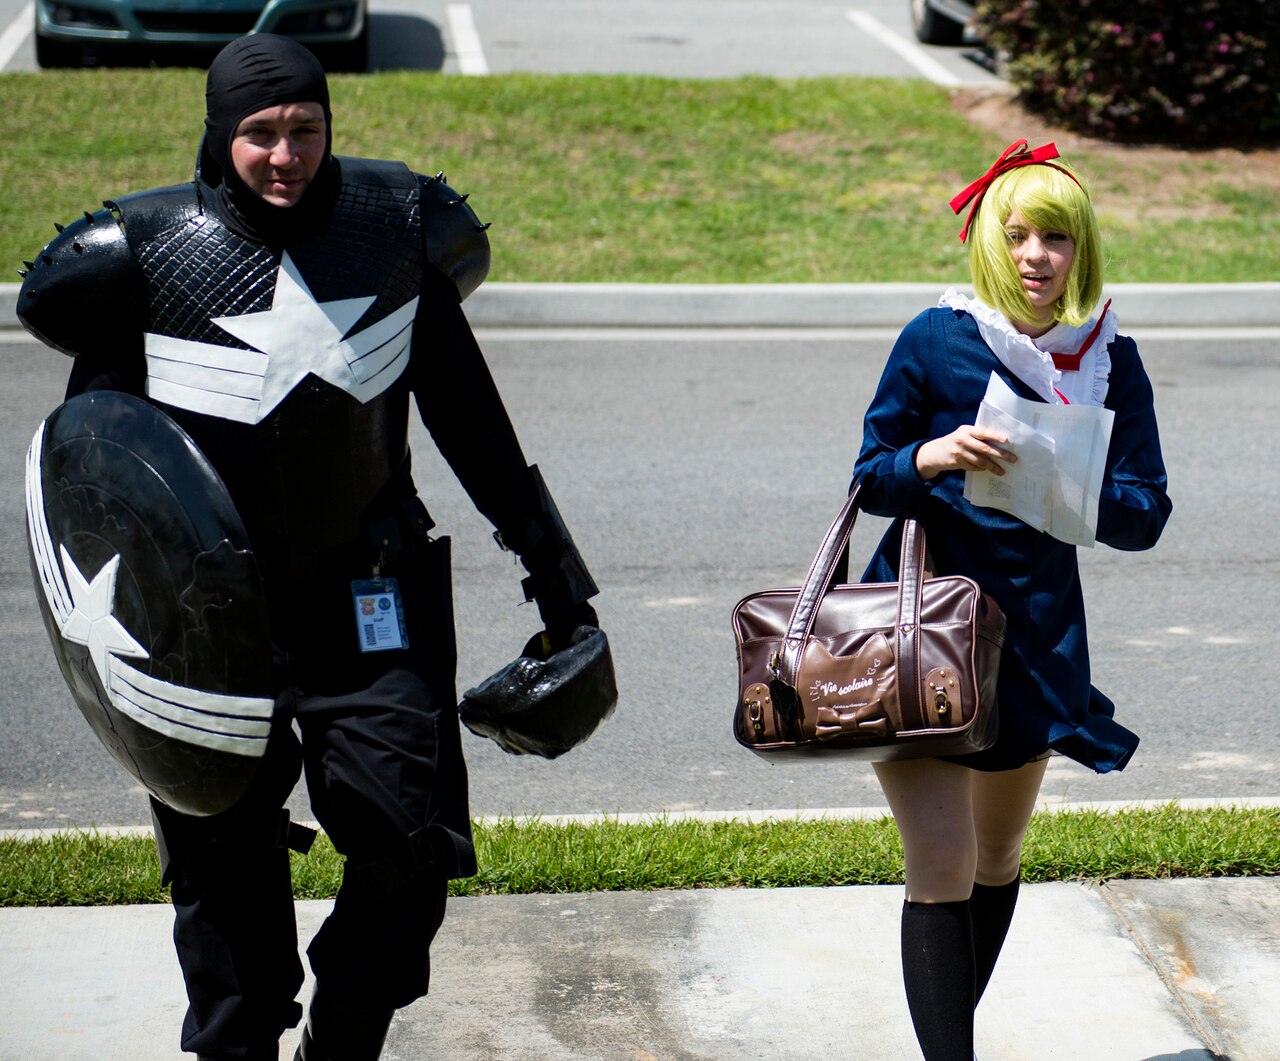 A man in a superhero costume and a woman in an anime schoolgirl costume